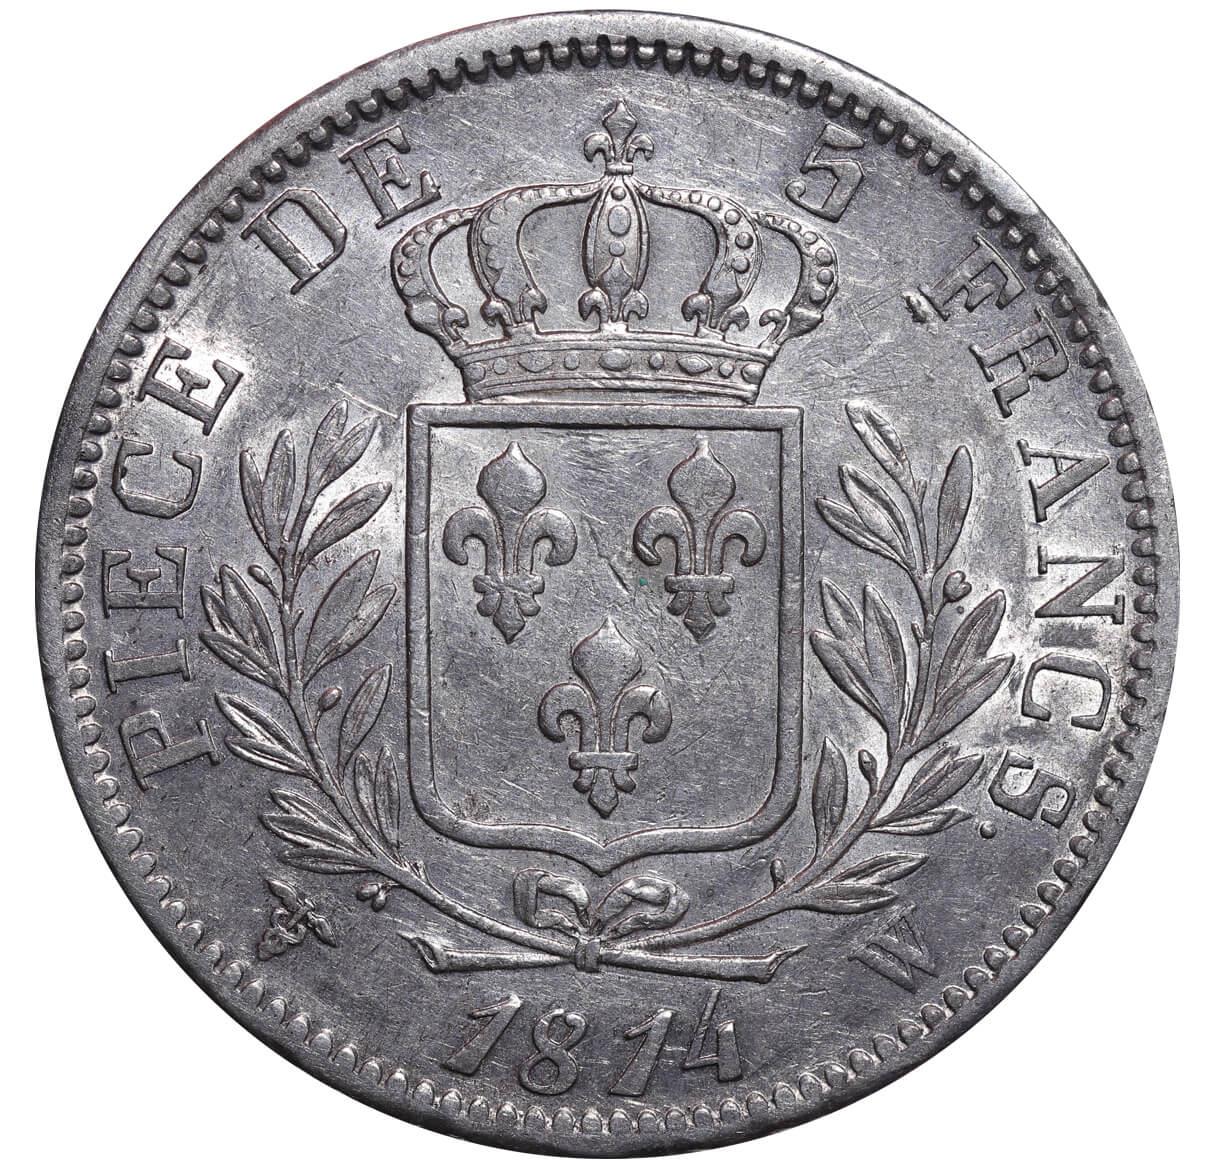 France, 5 Francs, 1814 year, W - Image 3 of 3